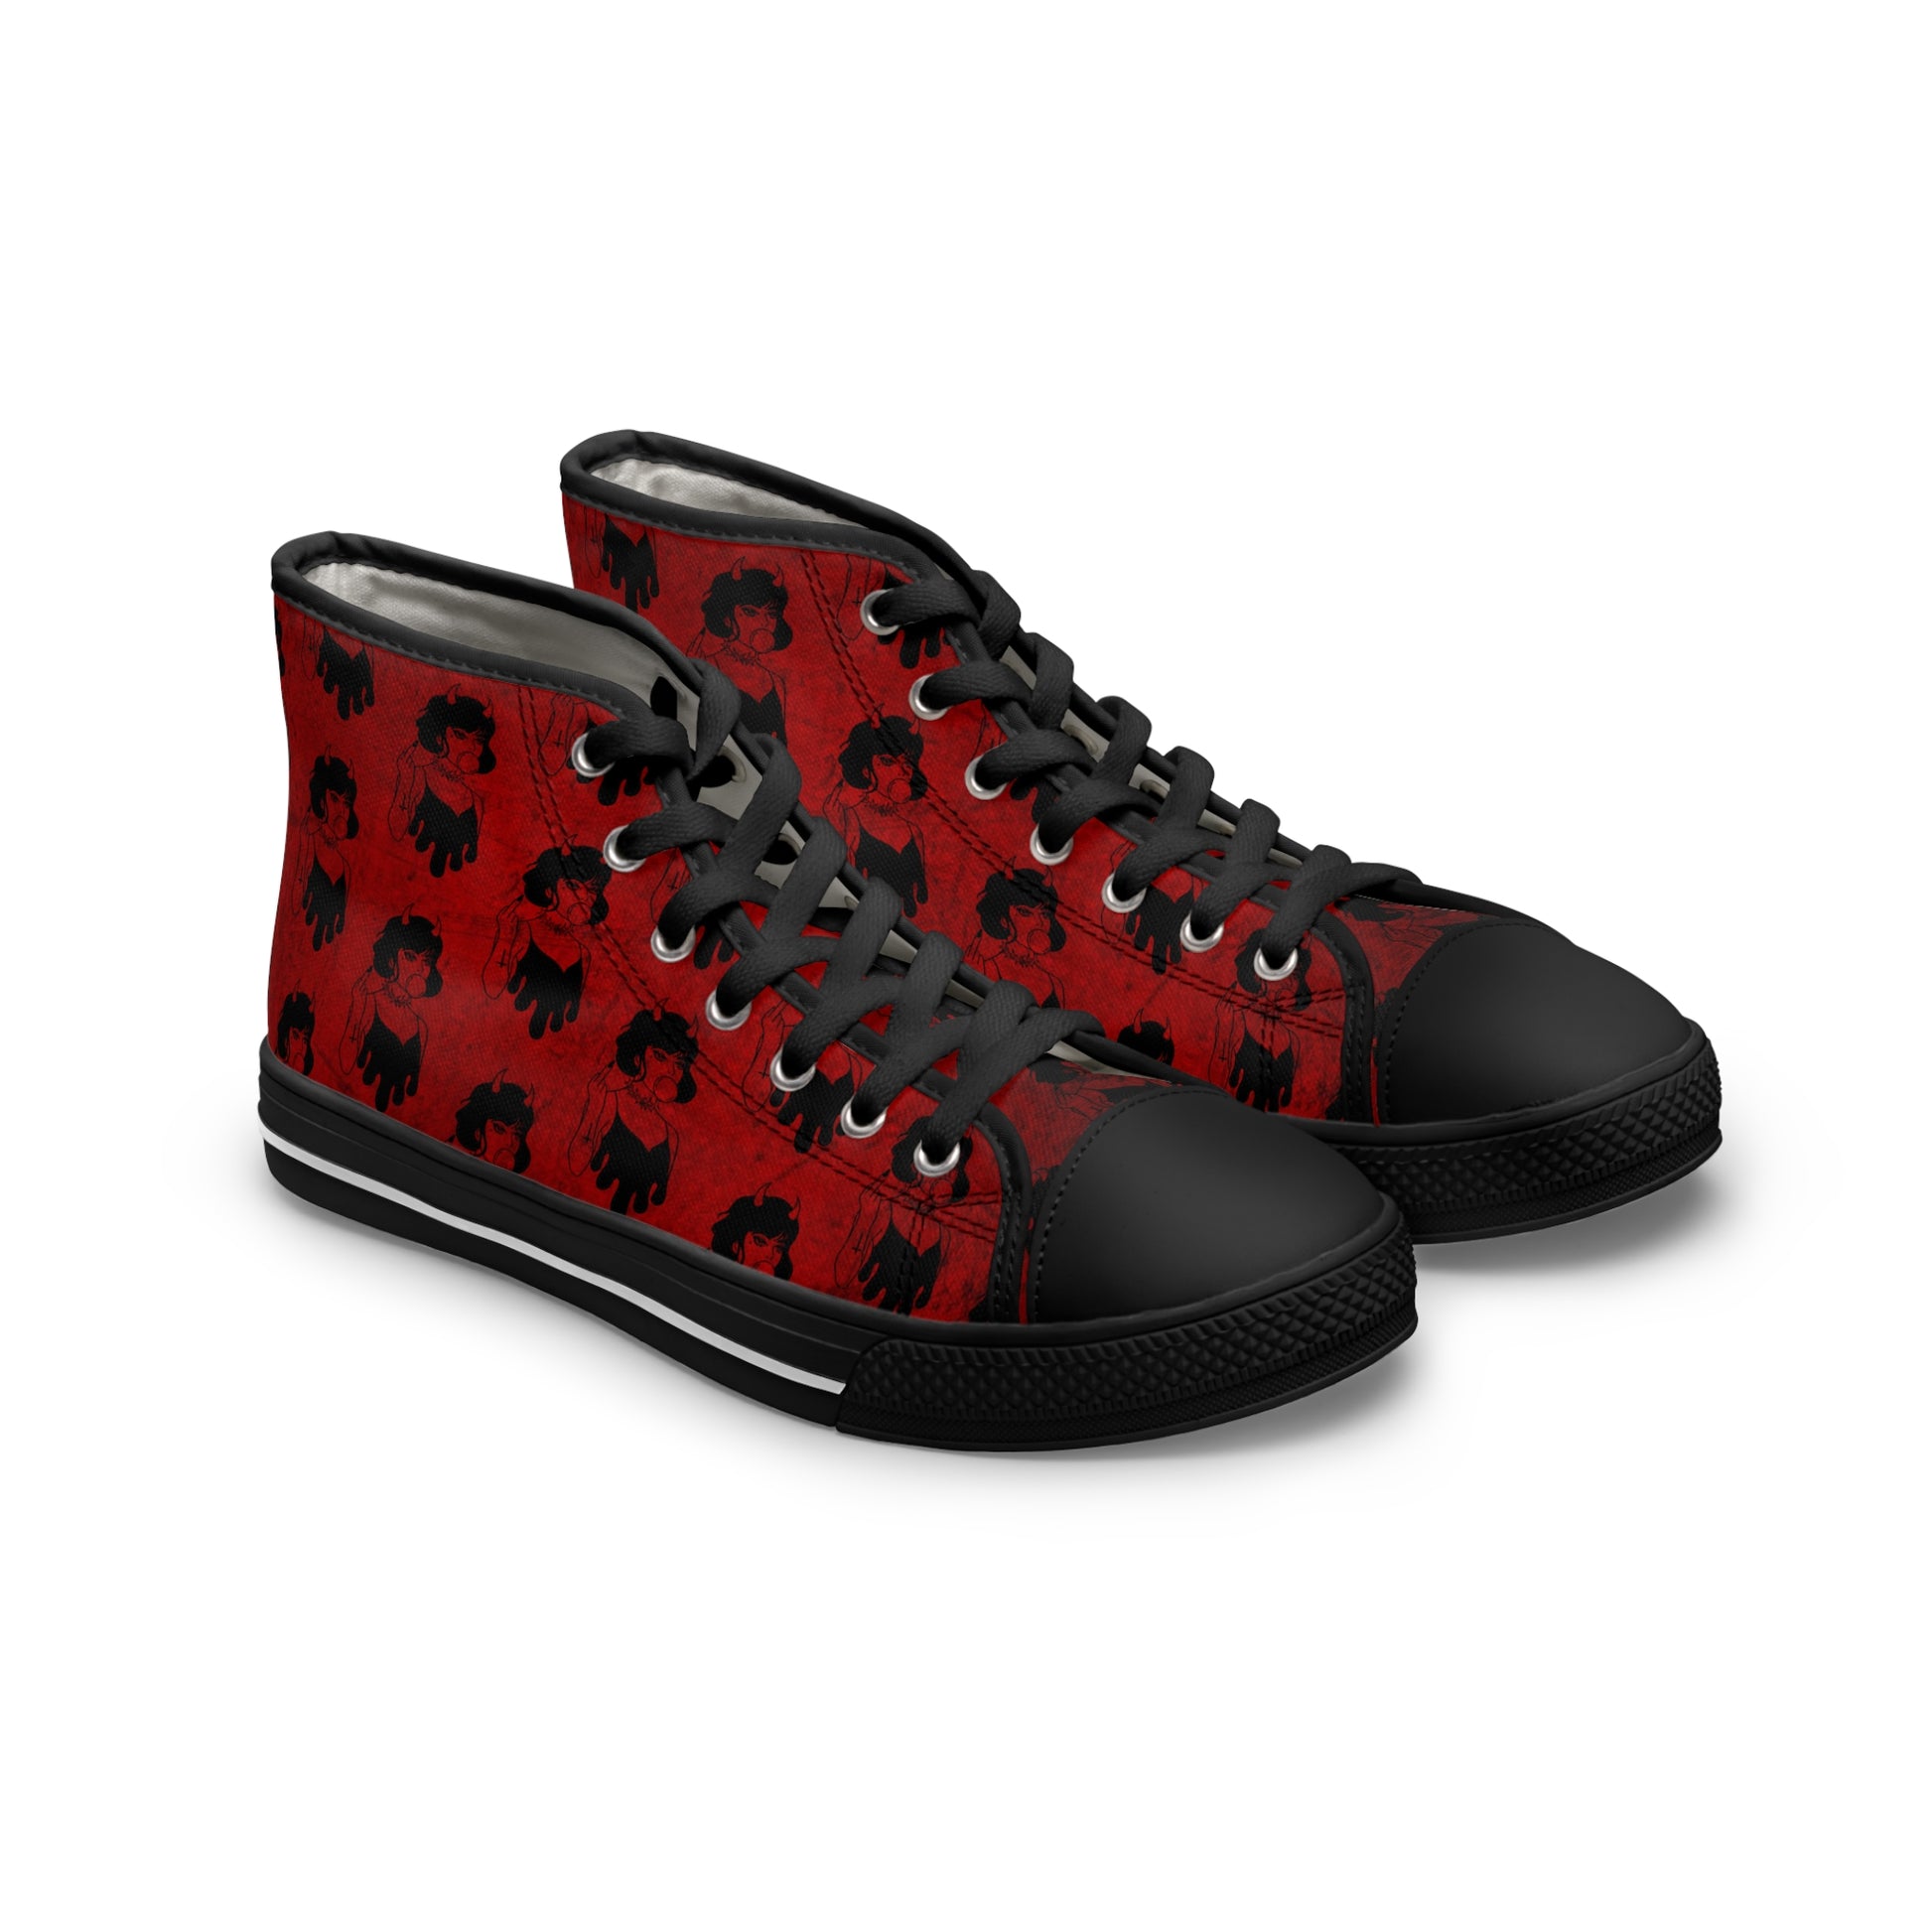 Red Goth Sneakers With Middle Finger Print